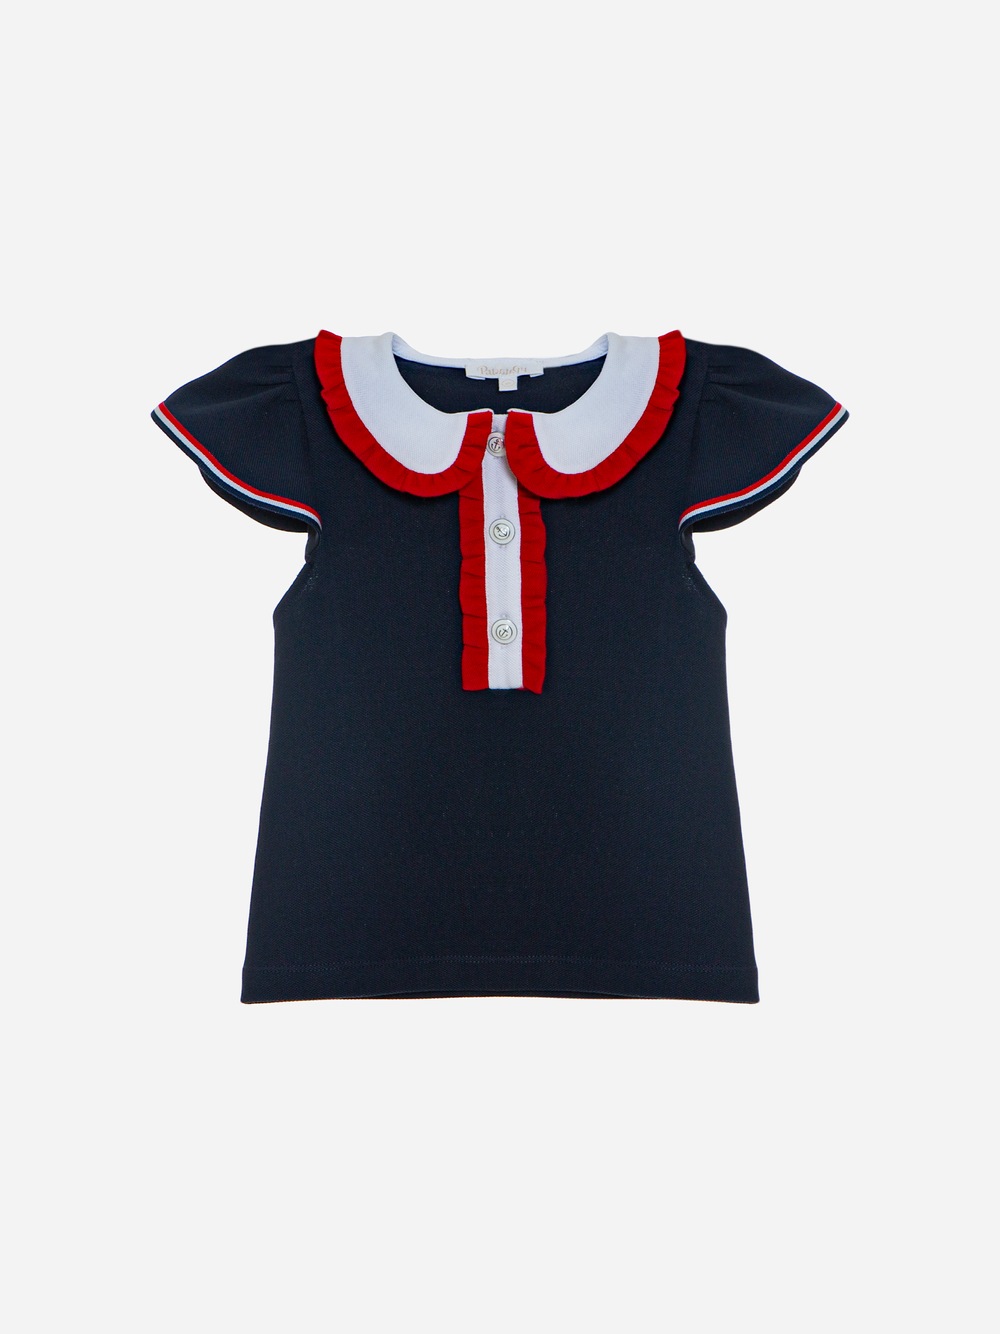 Girls navy blue polo with ruffles sleeves